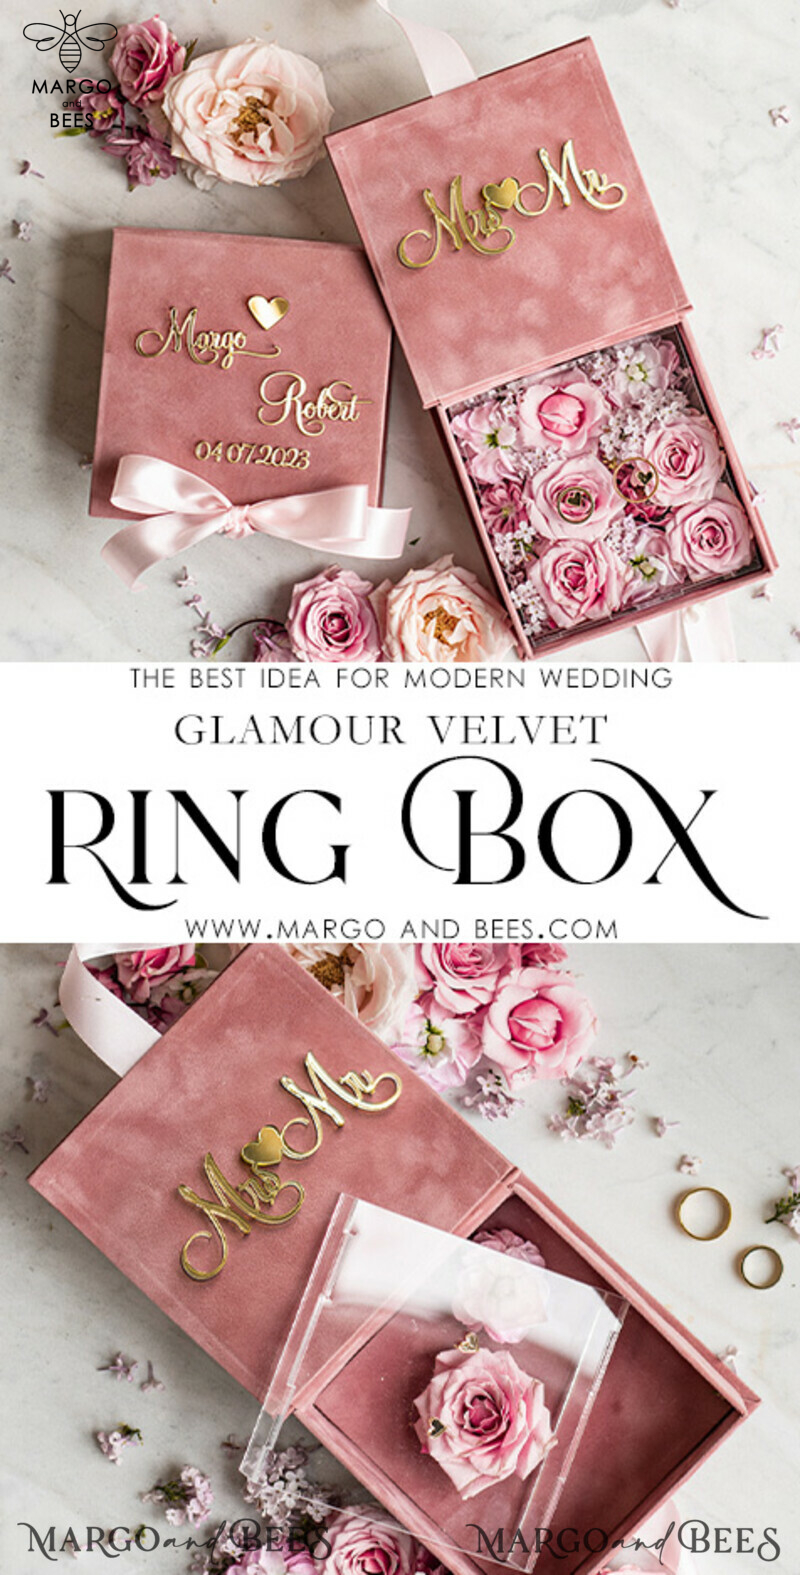 Luxury Blush Pink Golden Velvet Wedding Ring Box for Ceremony - Boho Glam His Hers Ring Boxes with Custom Colors-3